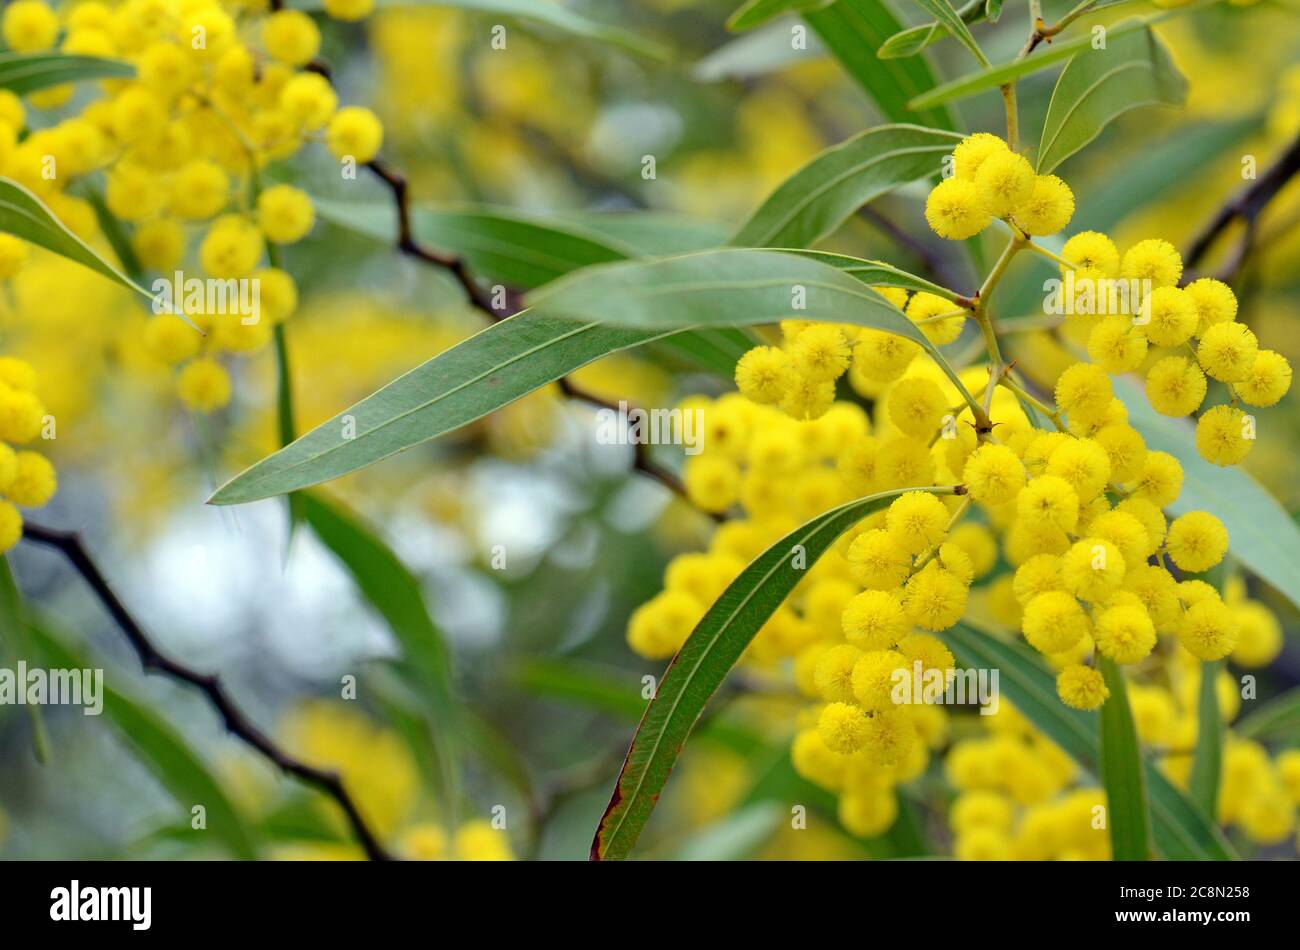 Flowers, leaves and distinctive stems of the Australian native Zig Zag wattle, Acacia macradenia, family Fabaceae. Endemic to central Queensland, Aust Stock Photo